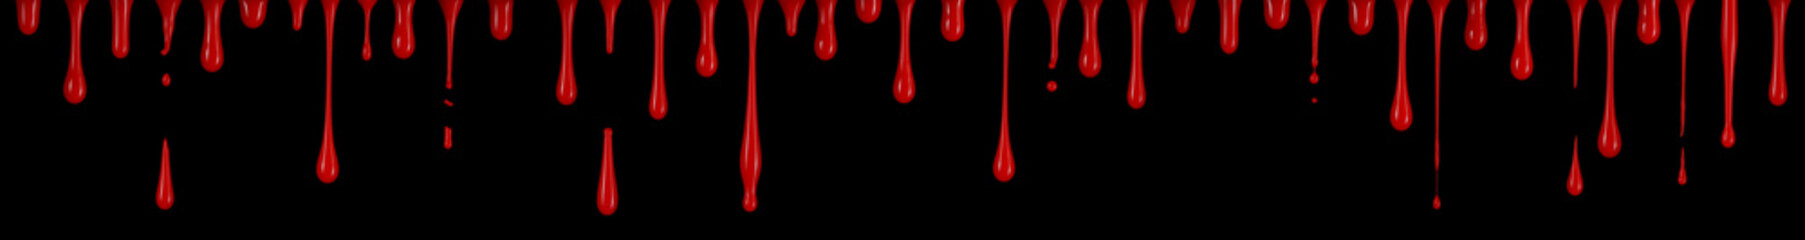 Row of several different blood drips and drops isolated on black. - 649058919